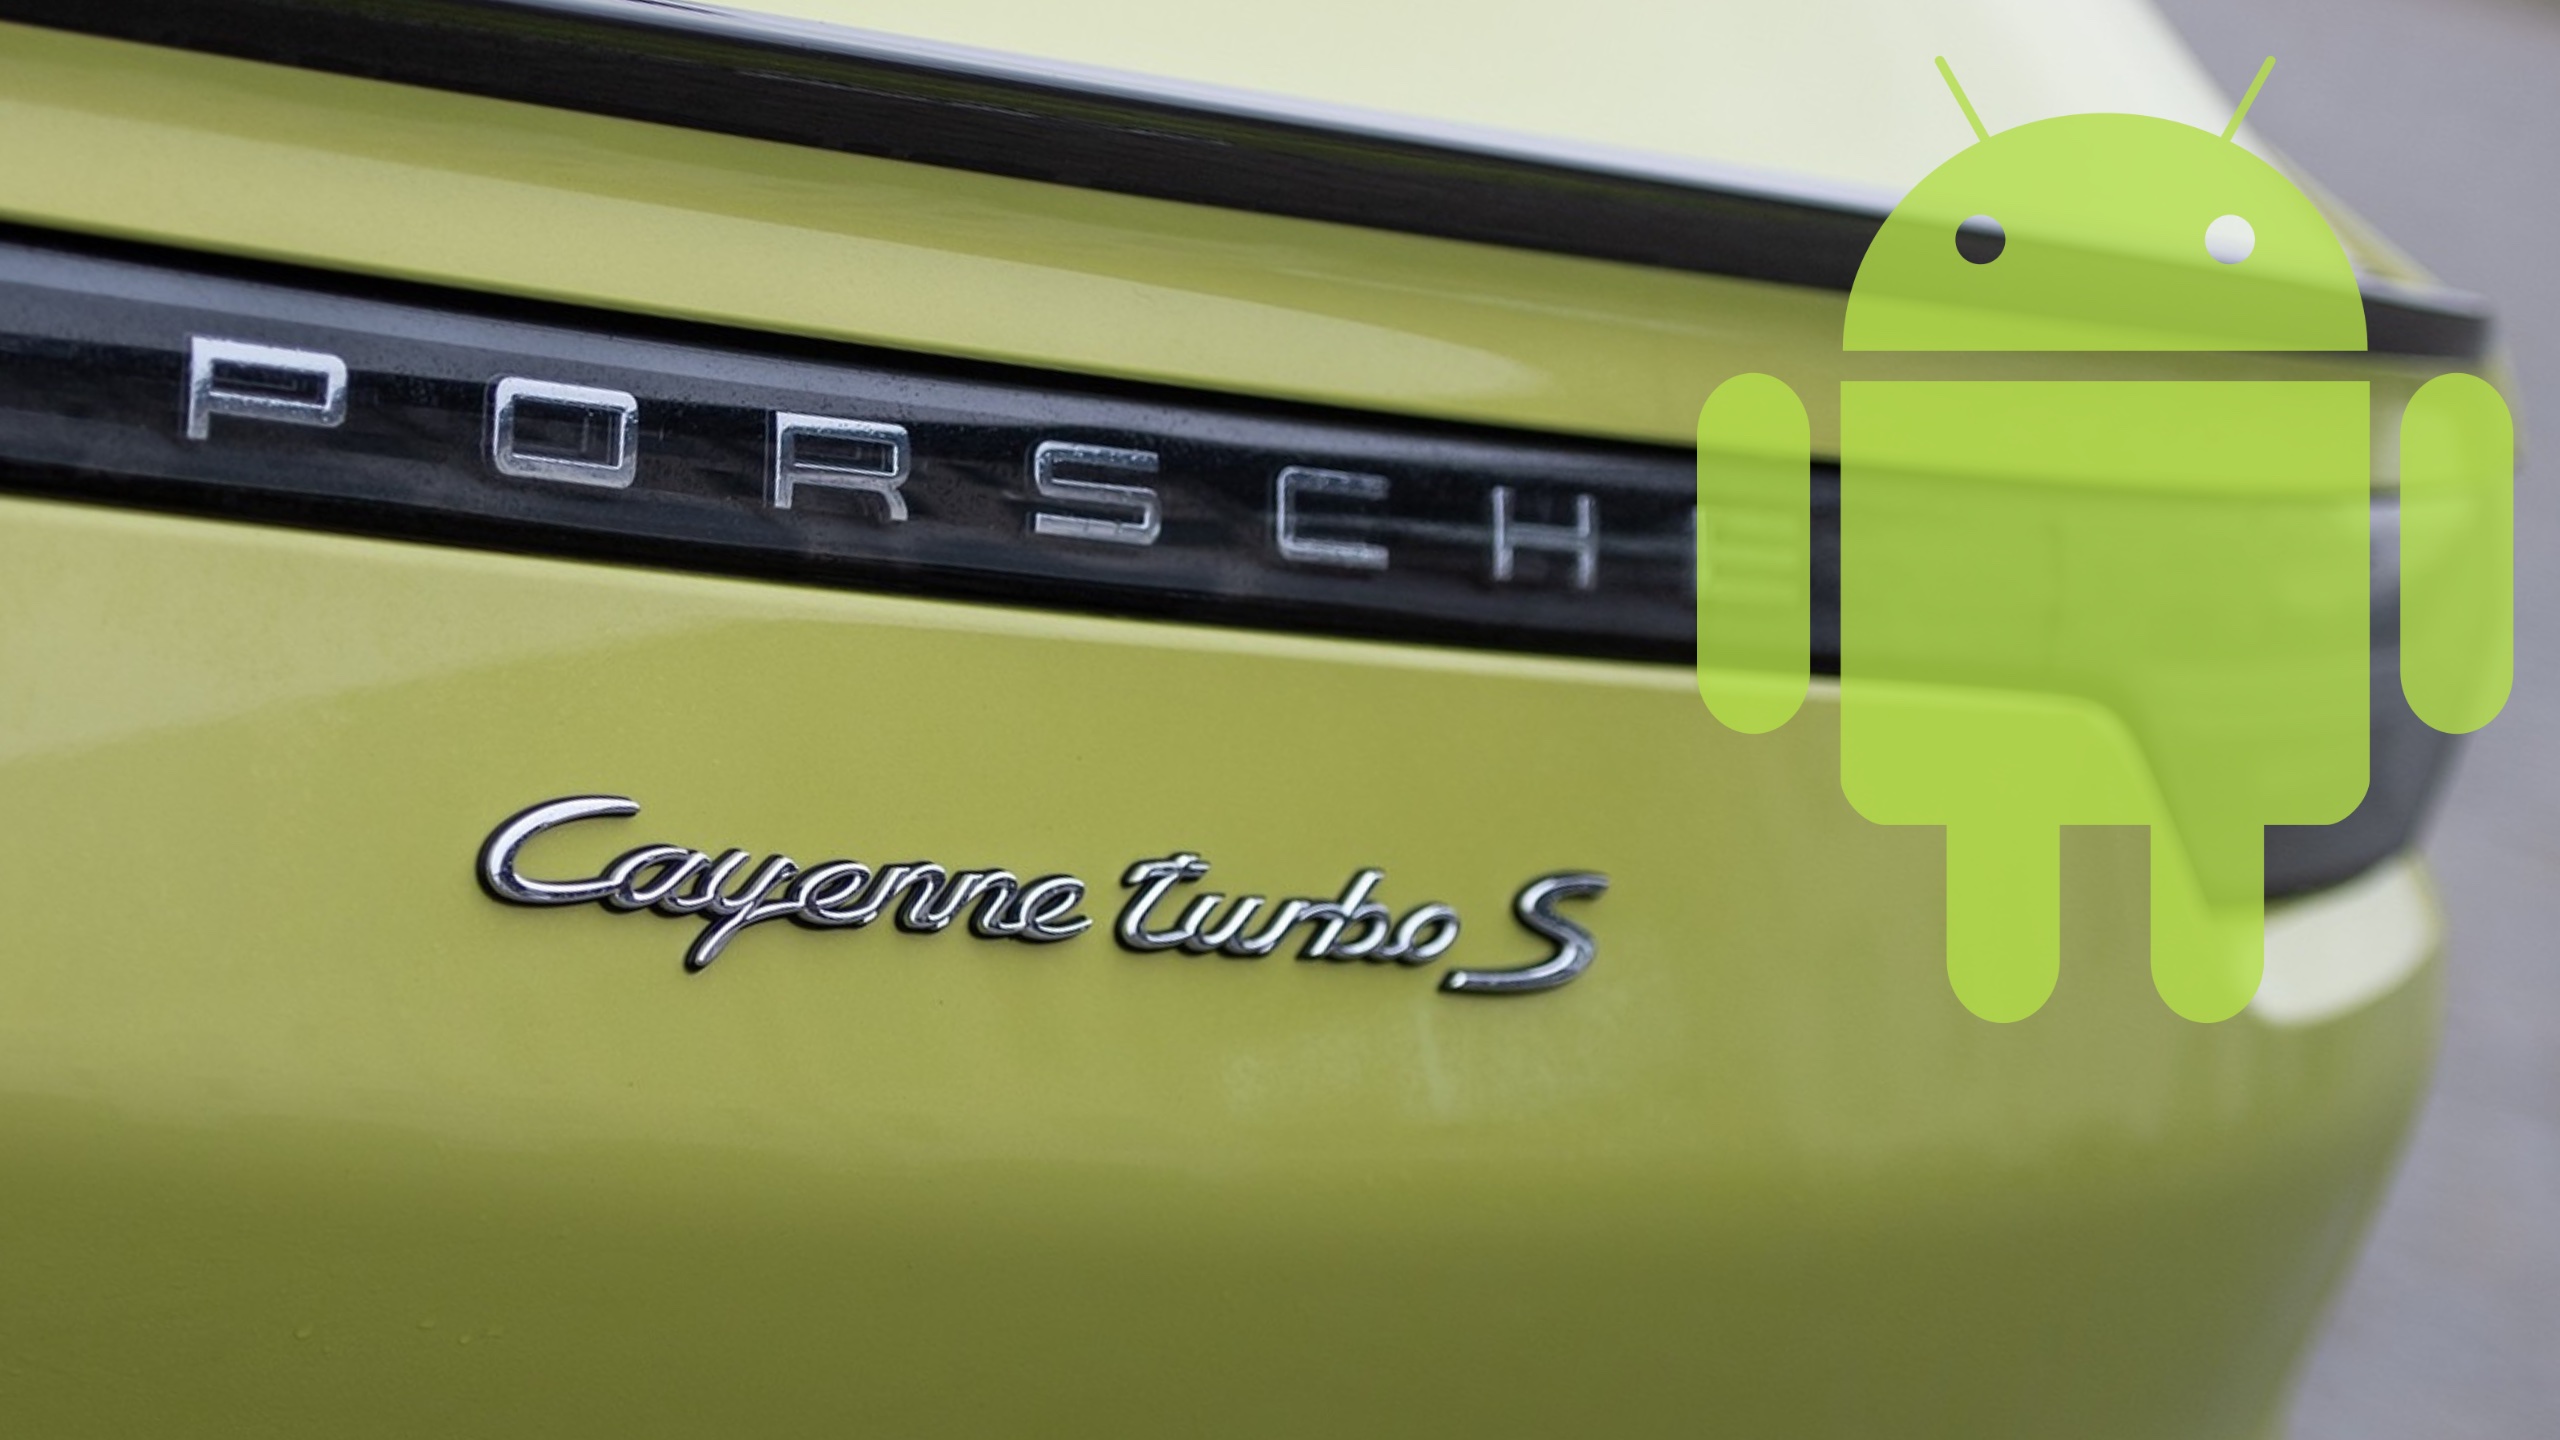 One More Carmaker Likely to Adopt Android as CarPlay Is Slowly Losing Ground